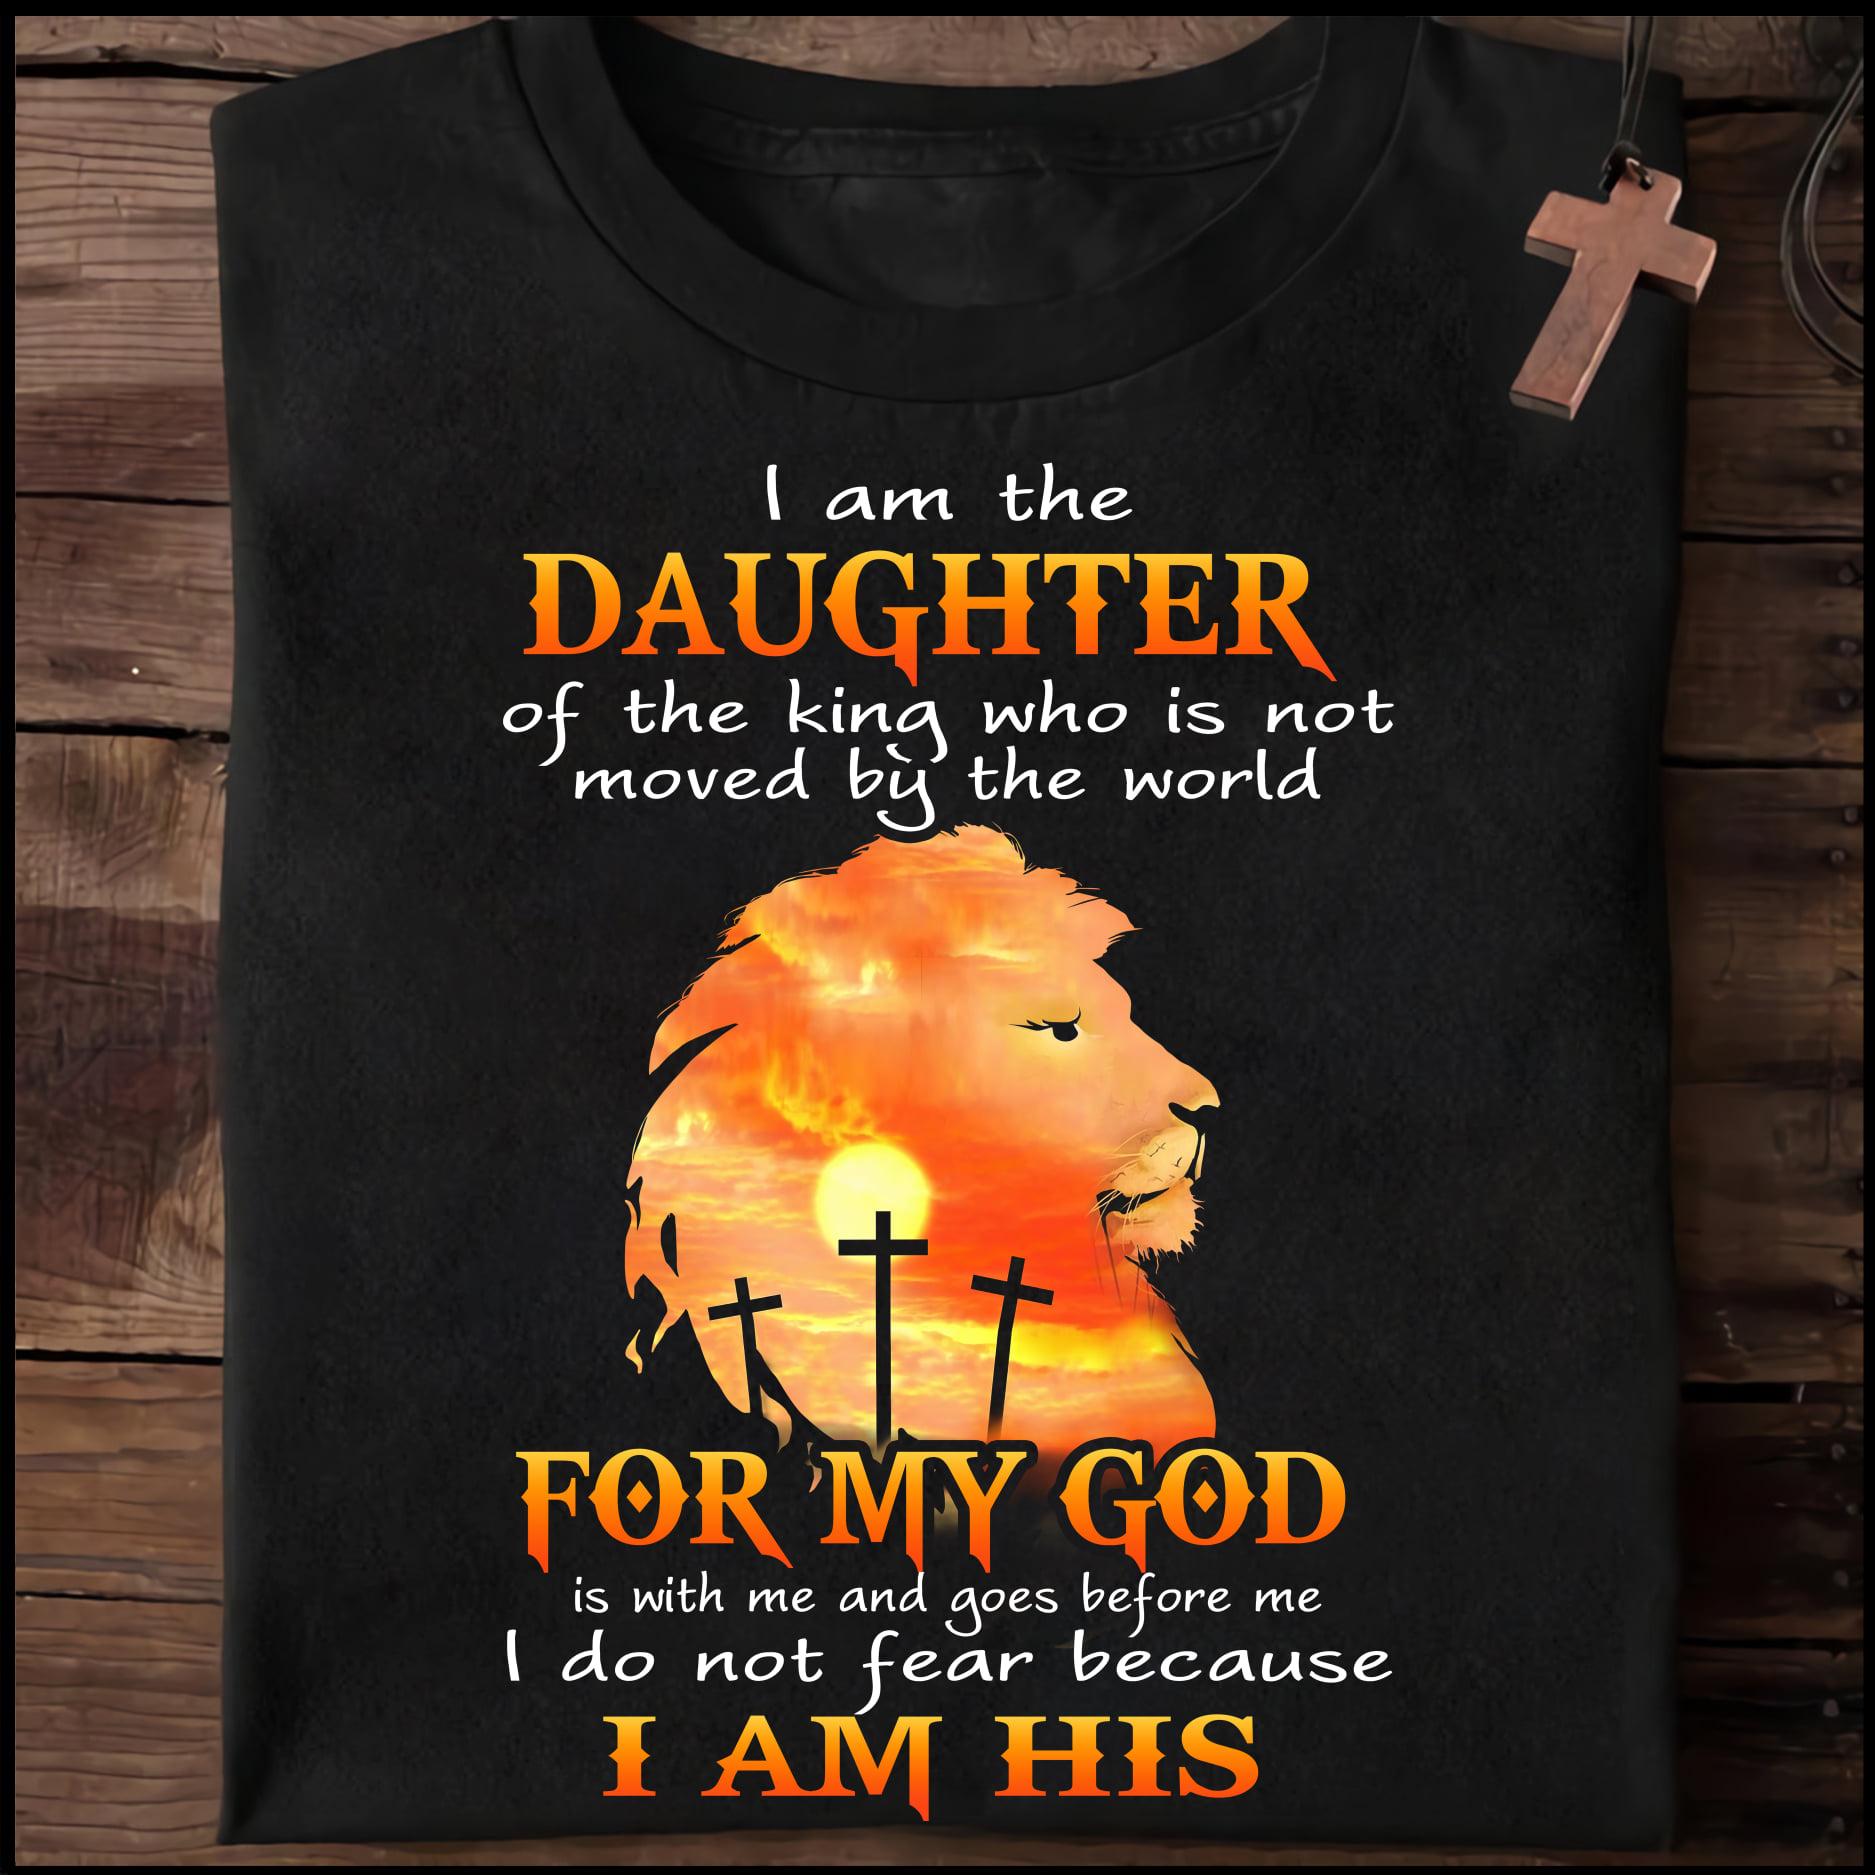 I am the daughter of the king who is not moved by the world for my god - Lion and God, Believe in Jesus, God's daughter